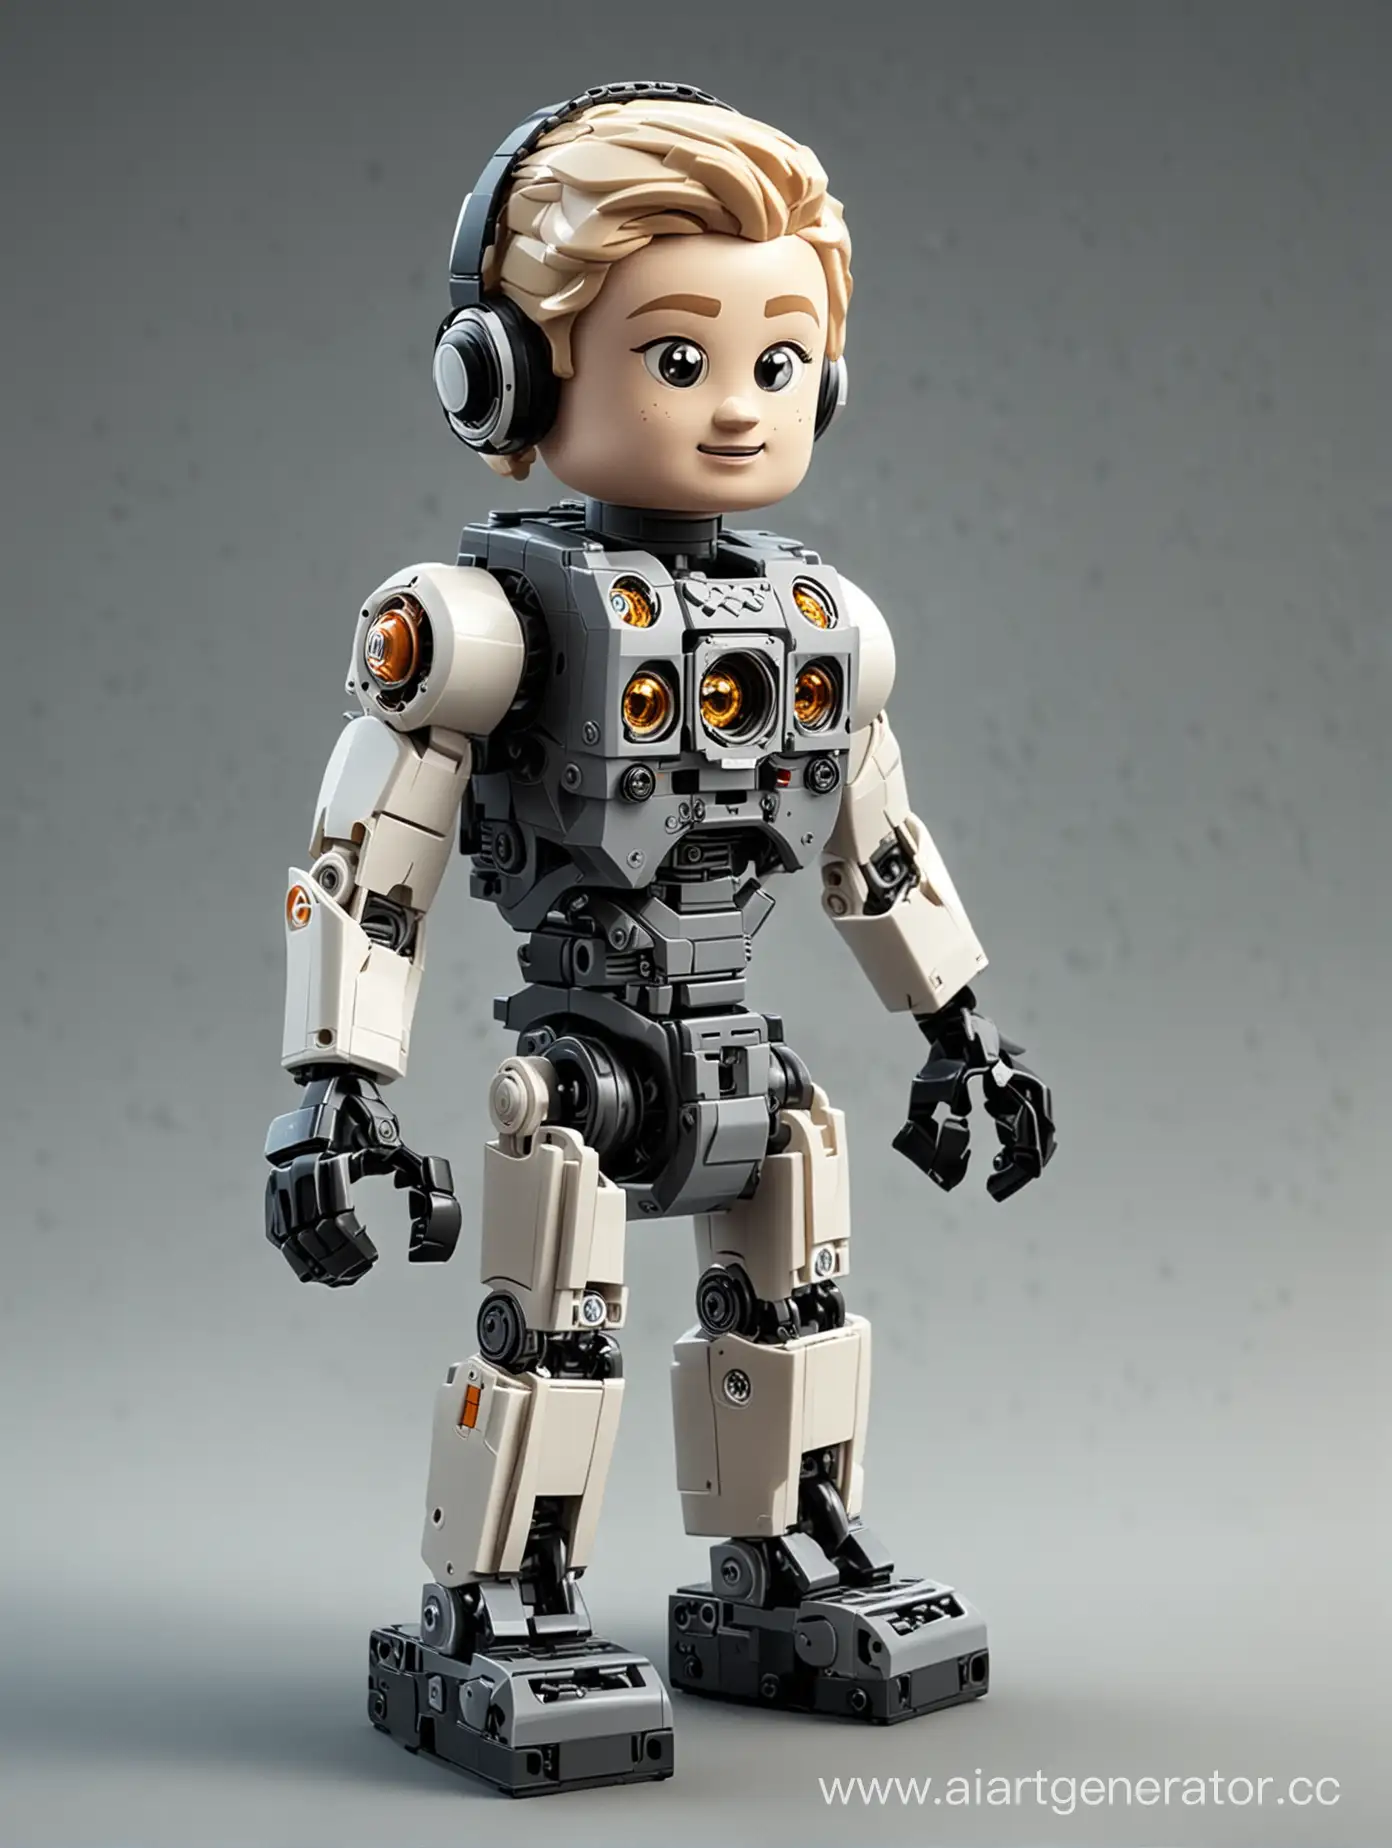 Children-Engaging-with-Robotics-and-LEGO-in-a-Web-20-Themed-Cartoon-World